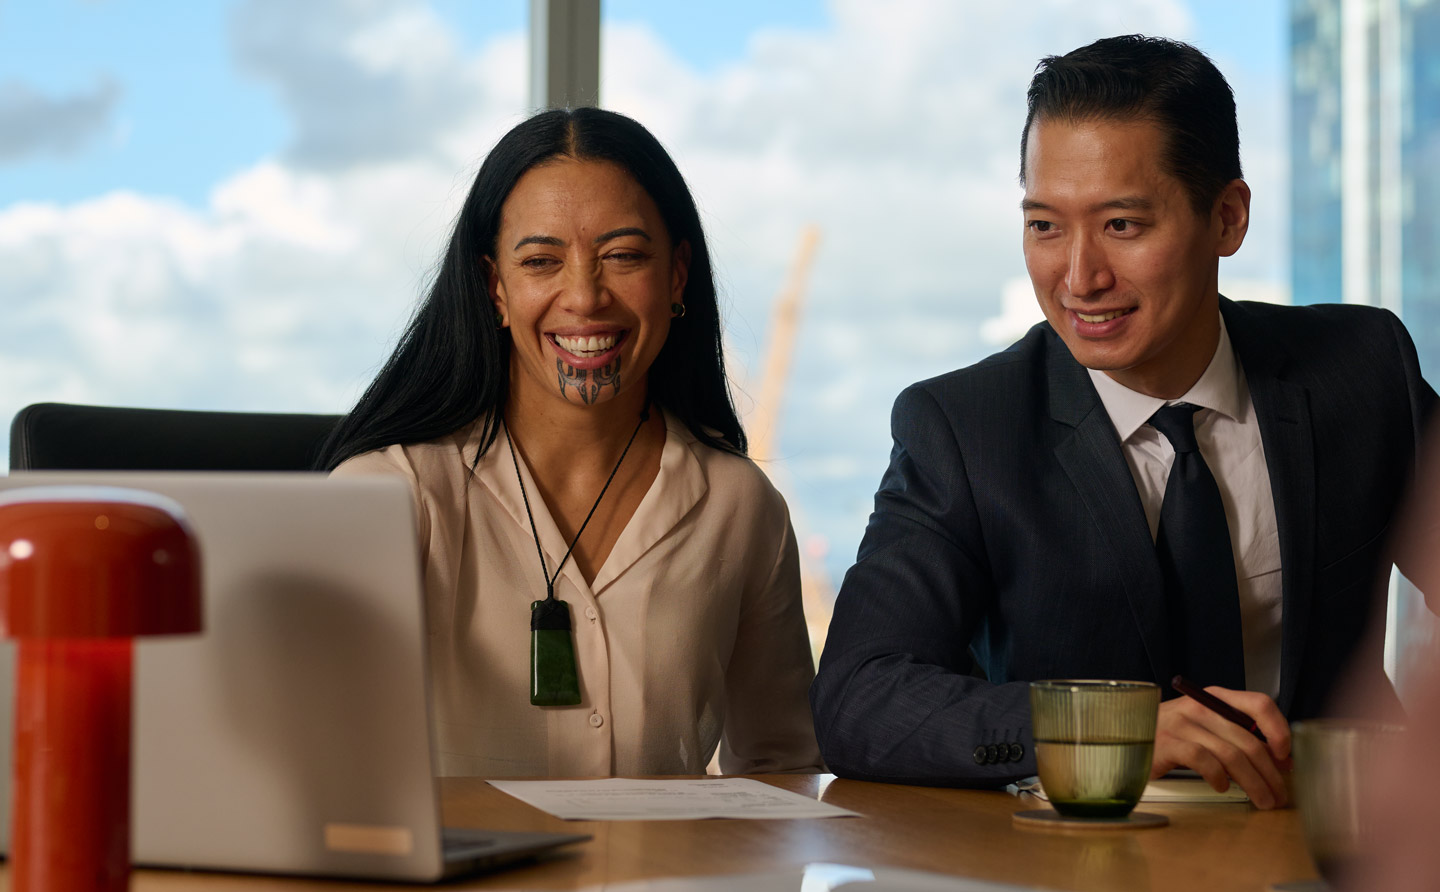 Wahine Māori with moko kauae and businessman looking at a laptop